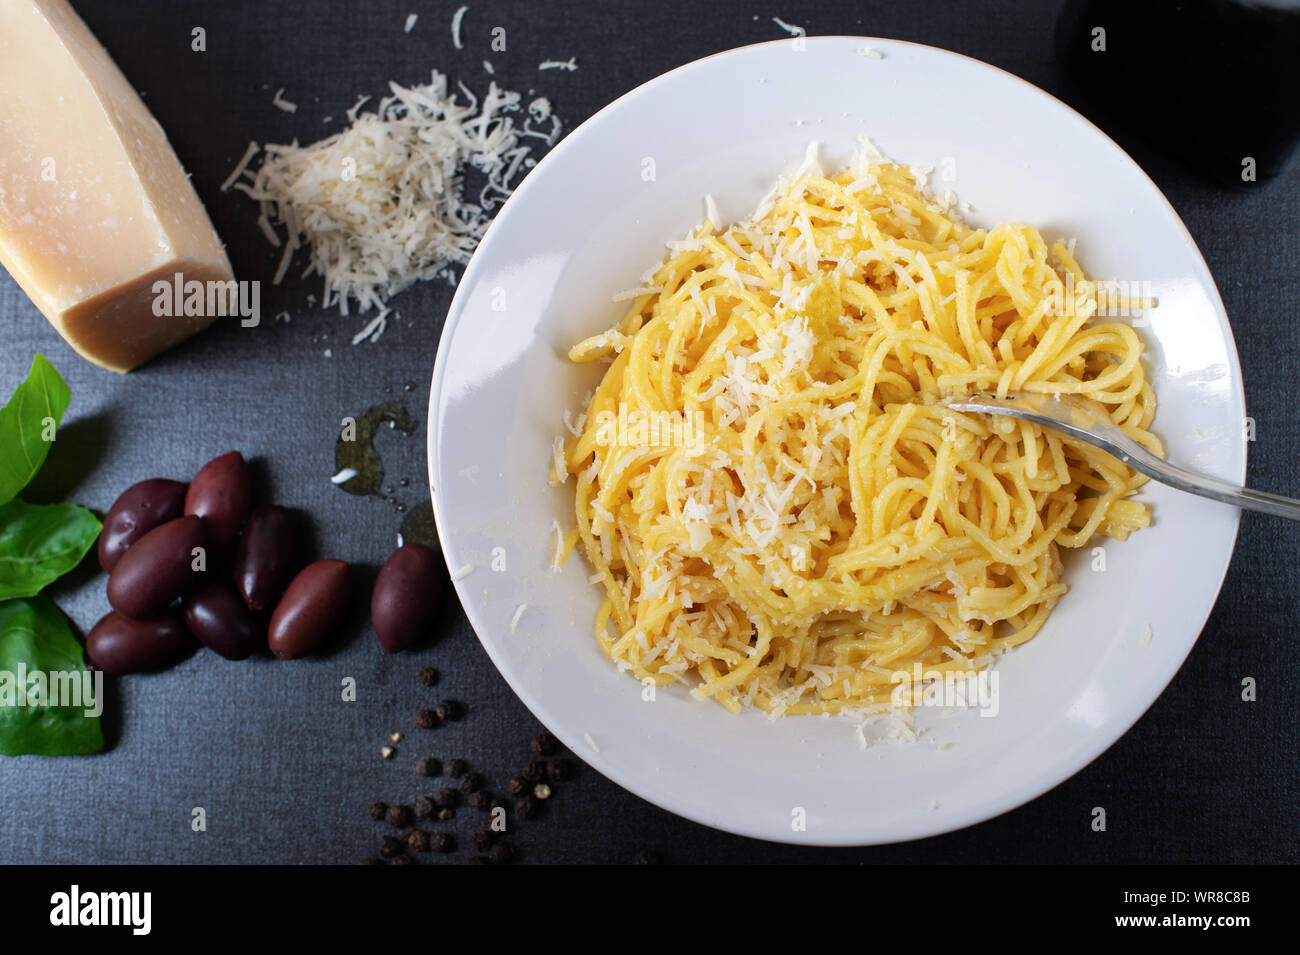 Spaghetti with parmesan cheese and olive oil Stock Photo